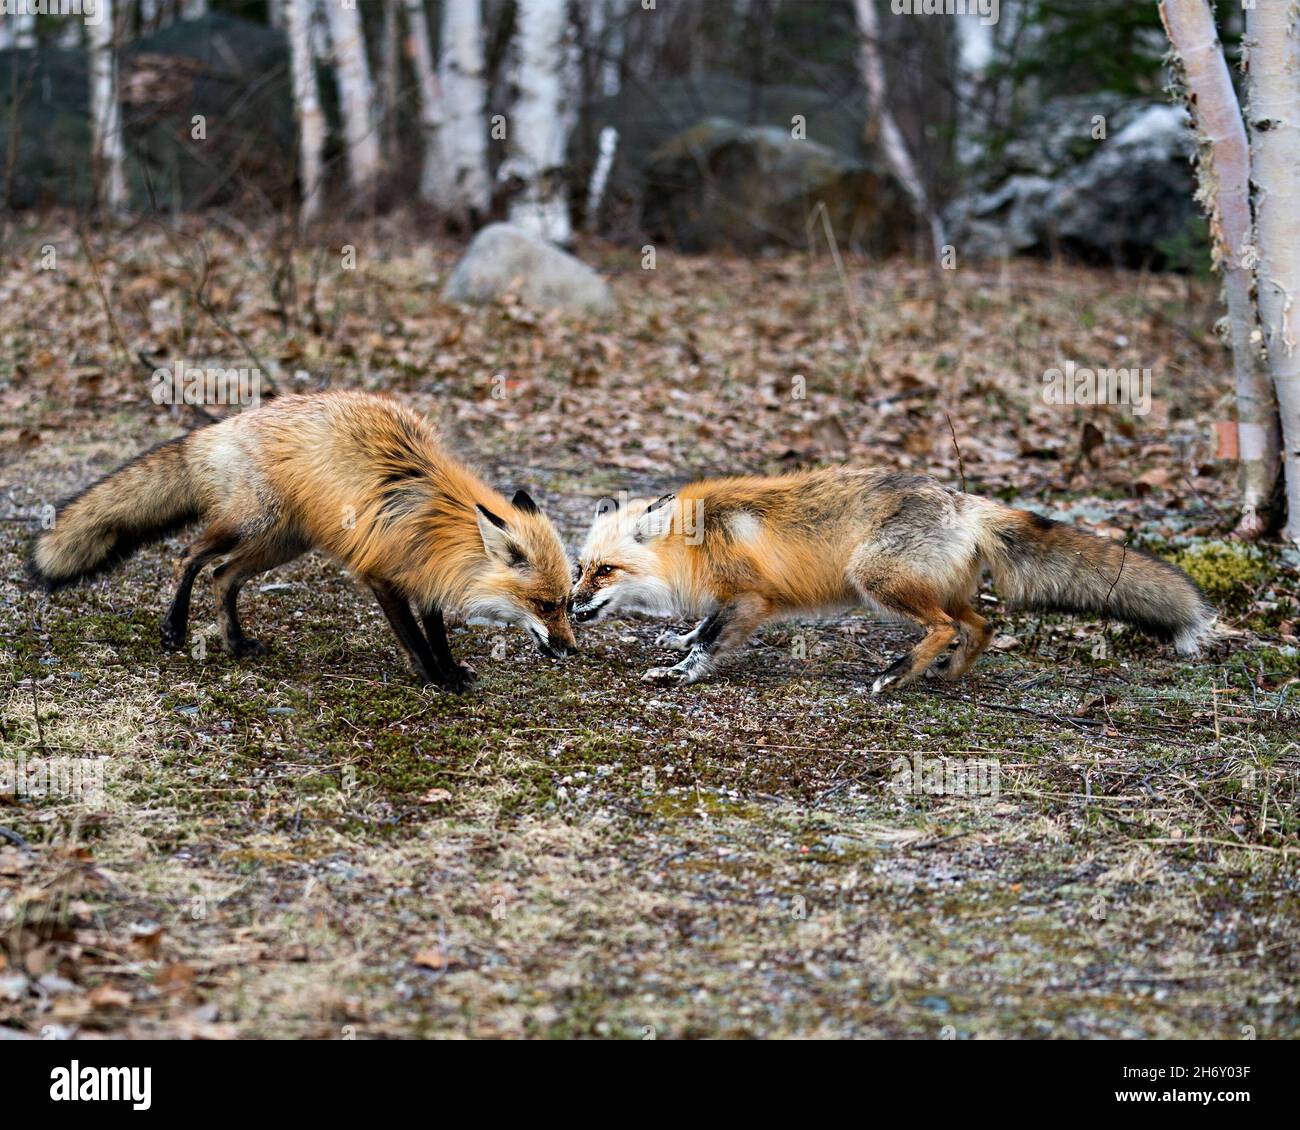 Red fox couple interacting with birch trees background in the springtime displaying fox tail, fur, in their environment and habitat. Fox Photo Image. Stock Photo